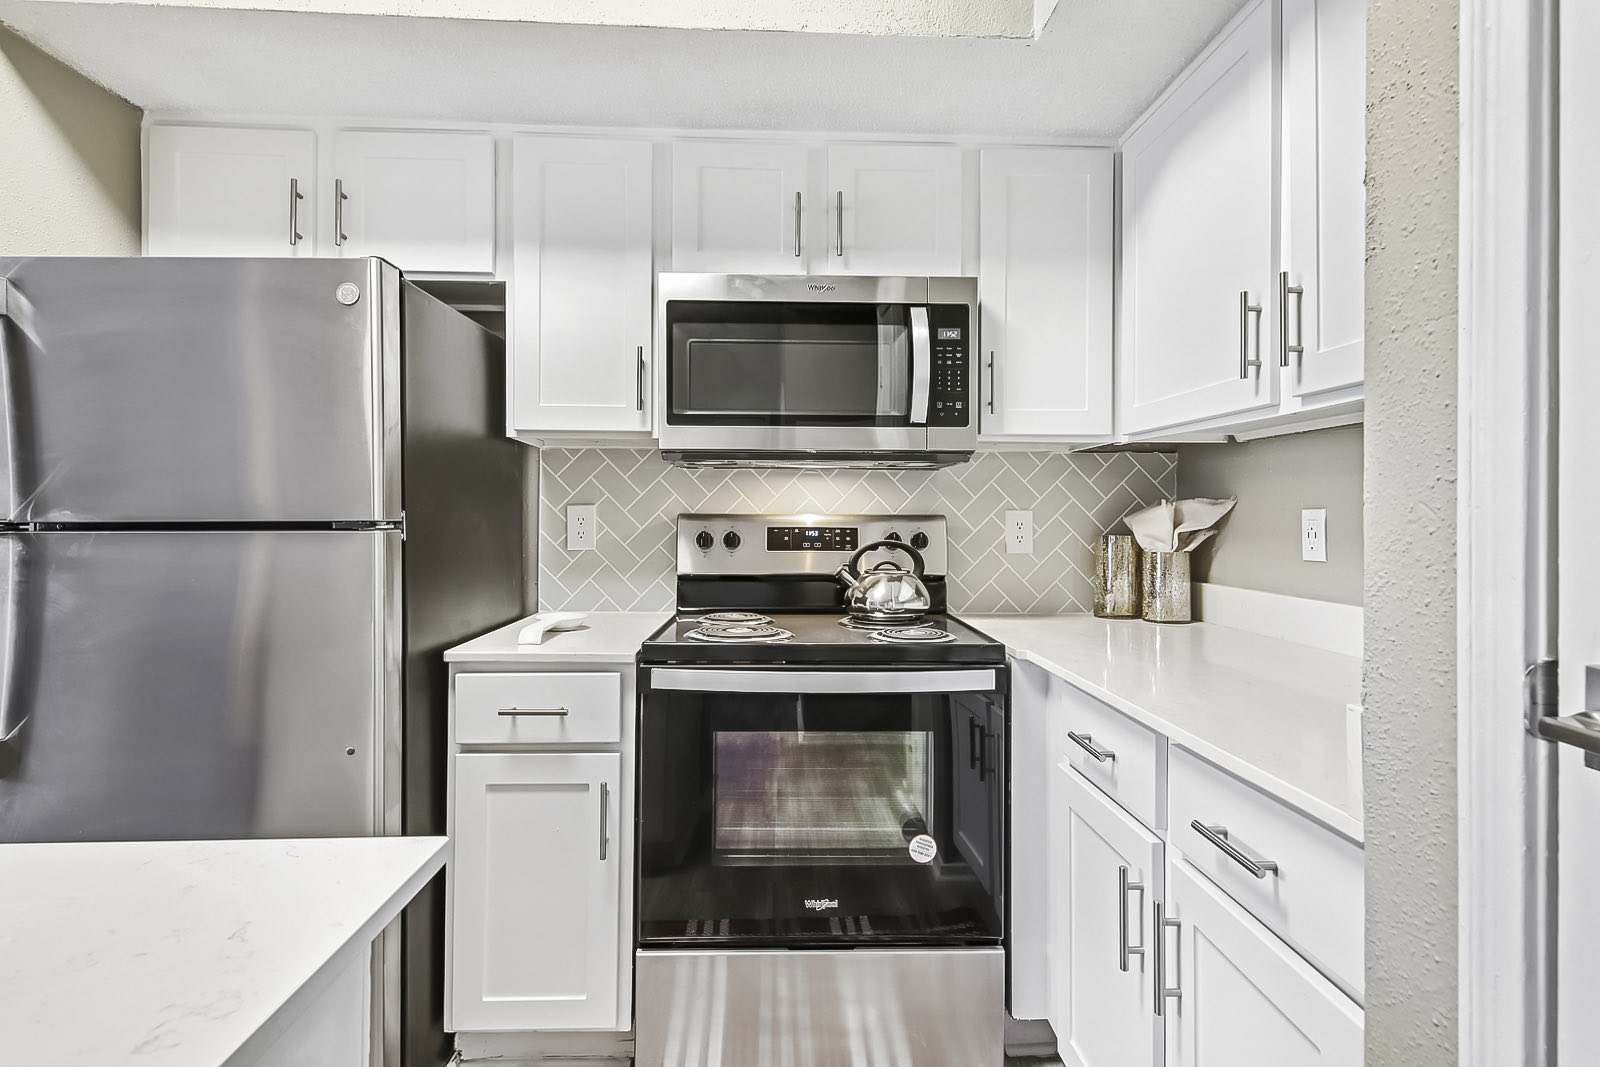 stainless steel appliances including electric range and overhead microwave